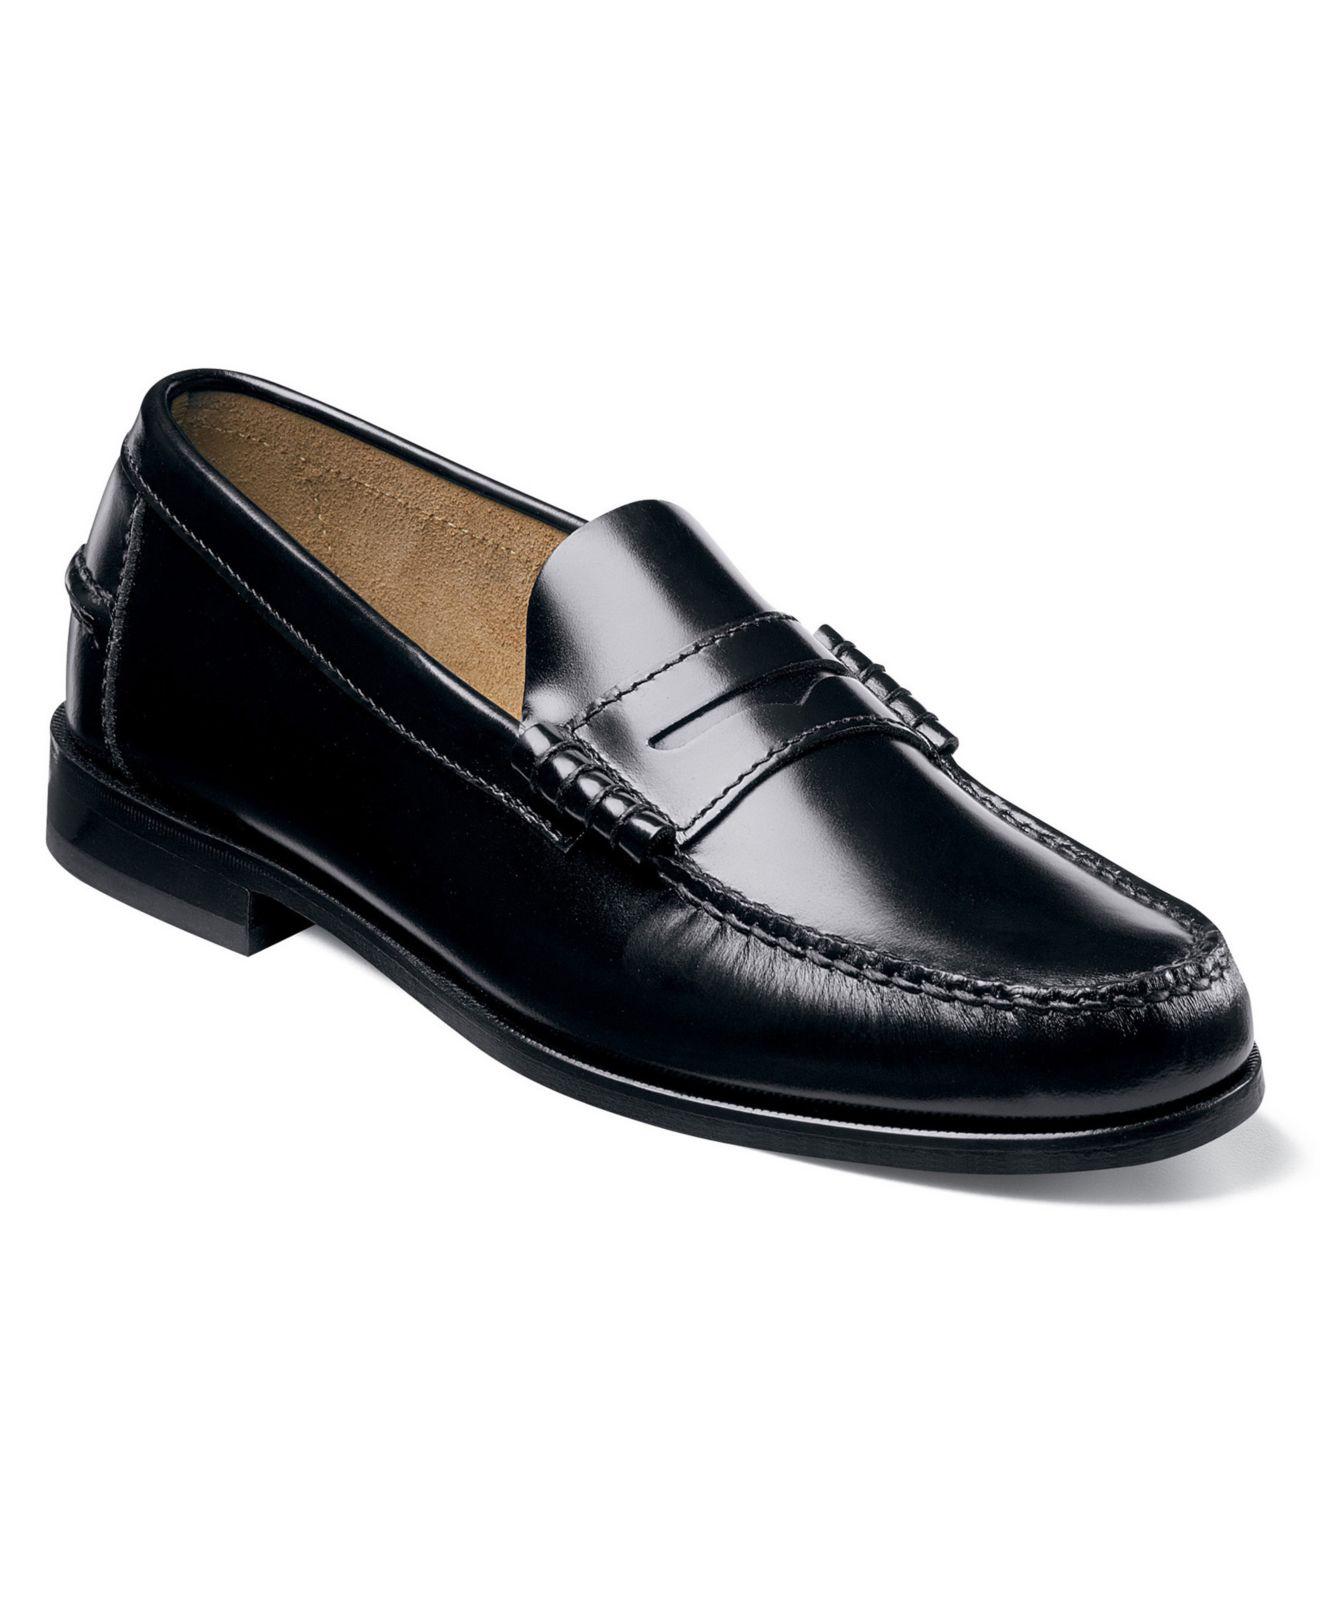 Florsheim Leather Shoes Berkley Penny Loafers In Black For Men Lyst